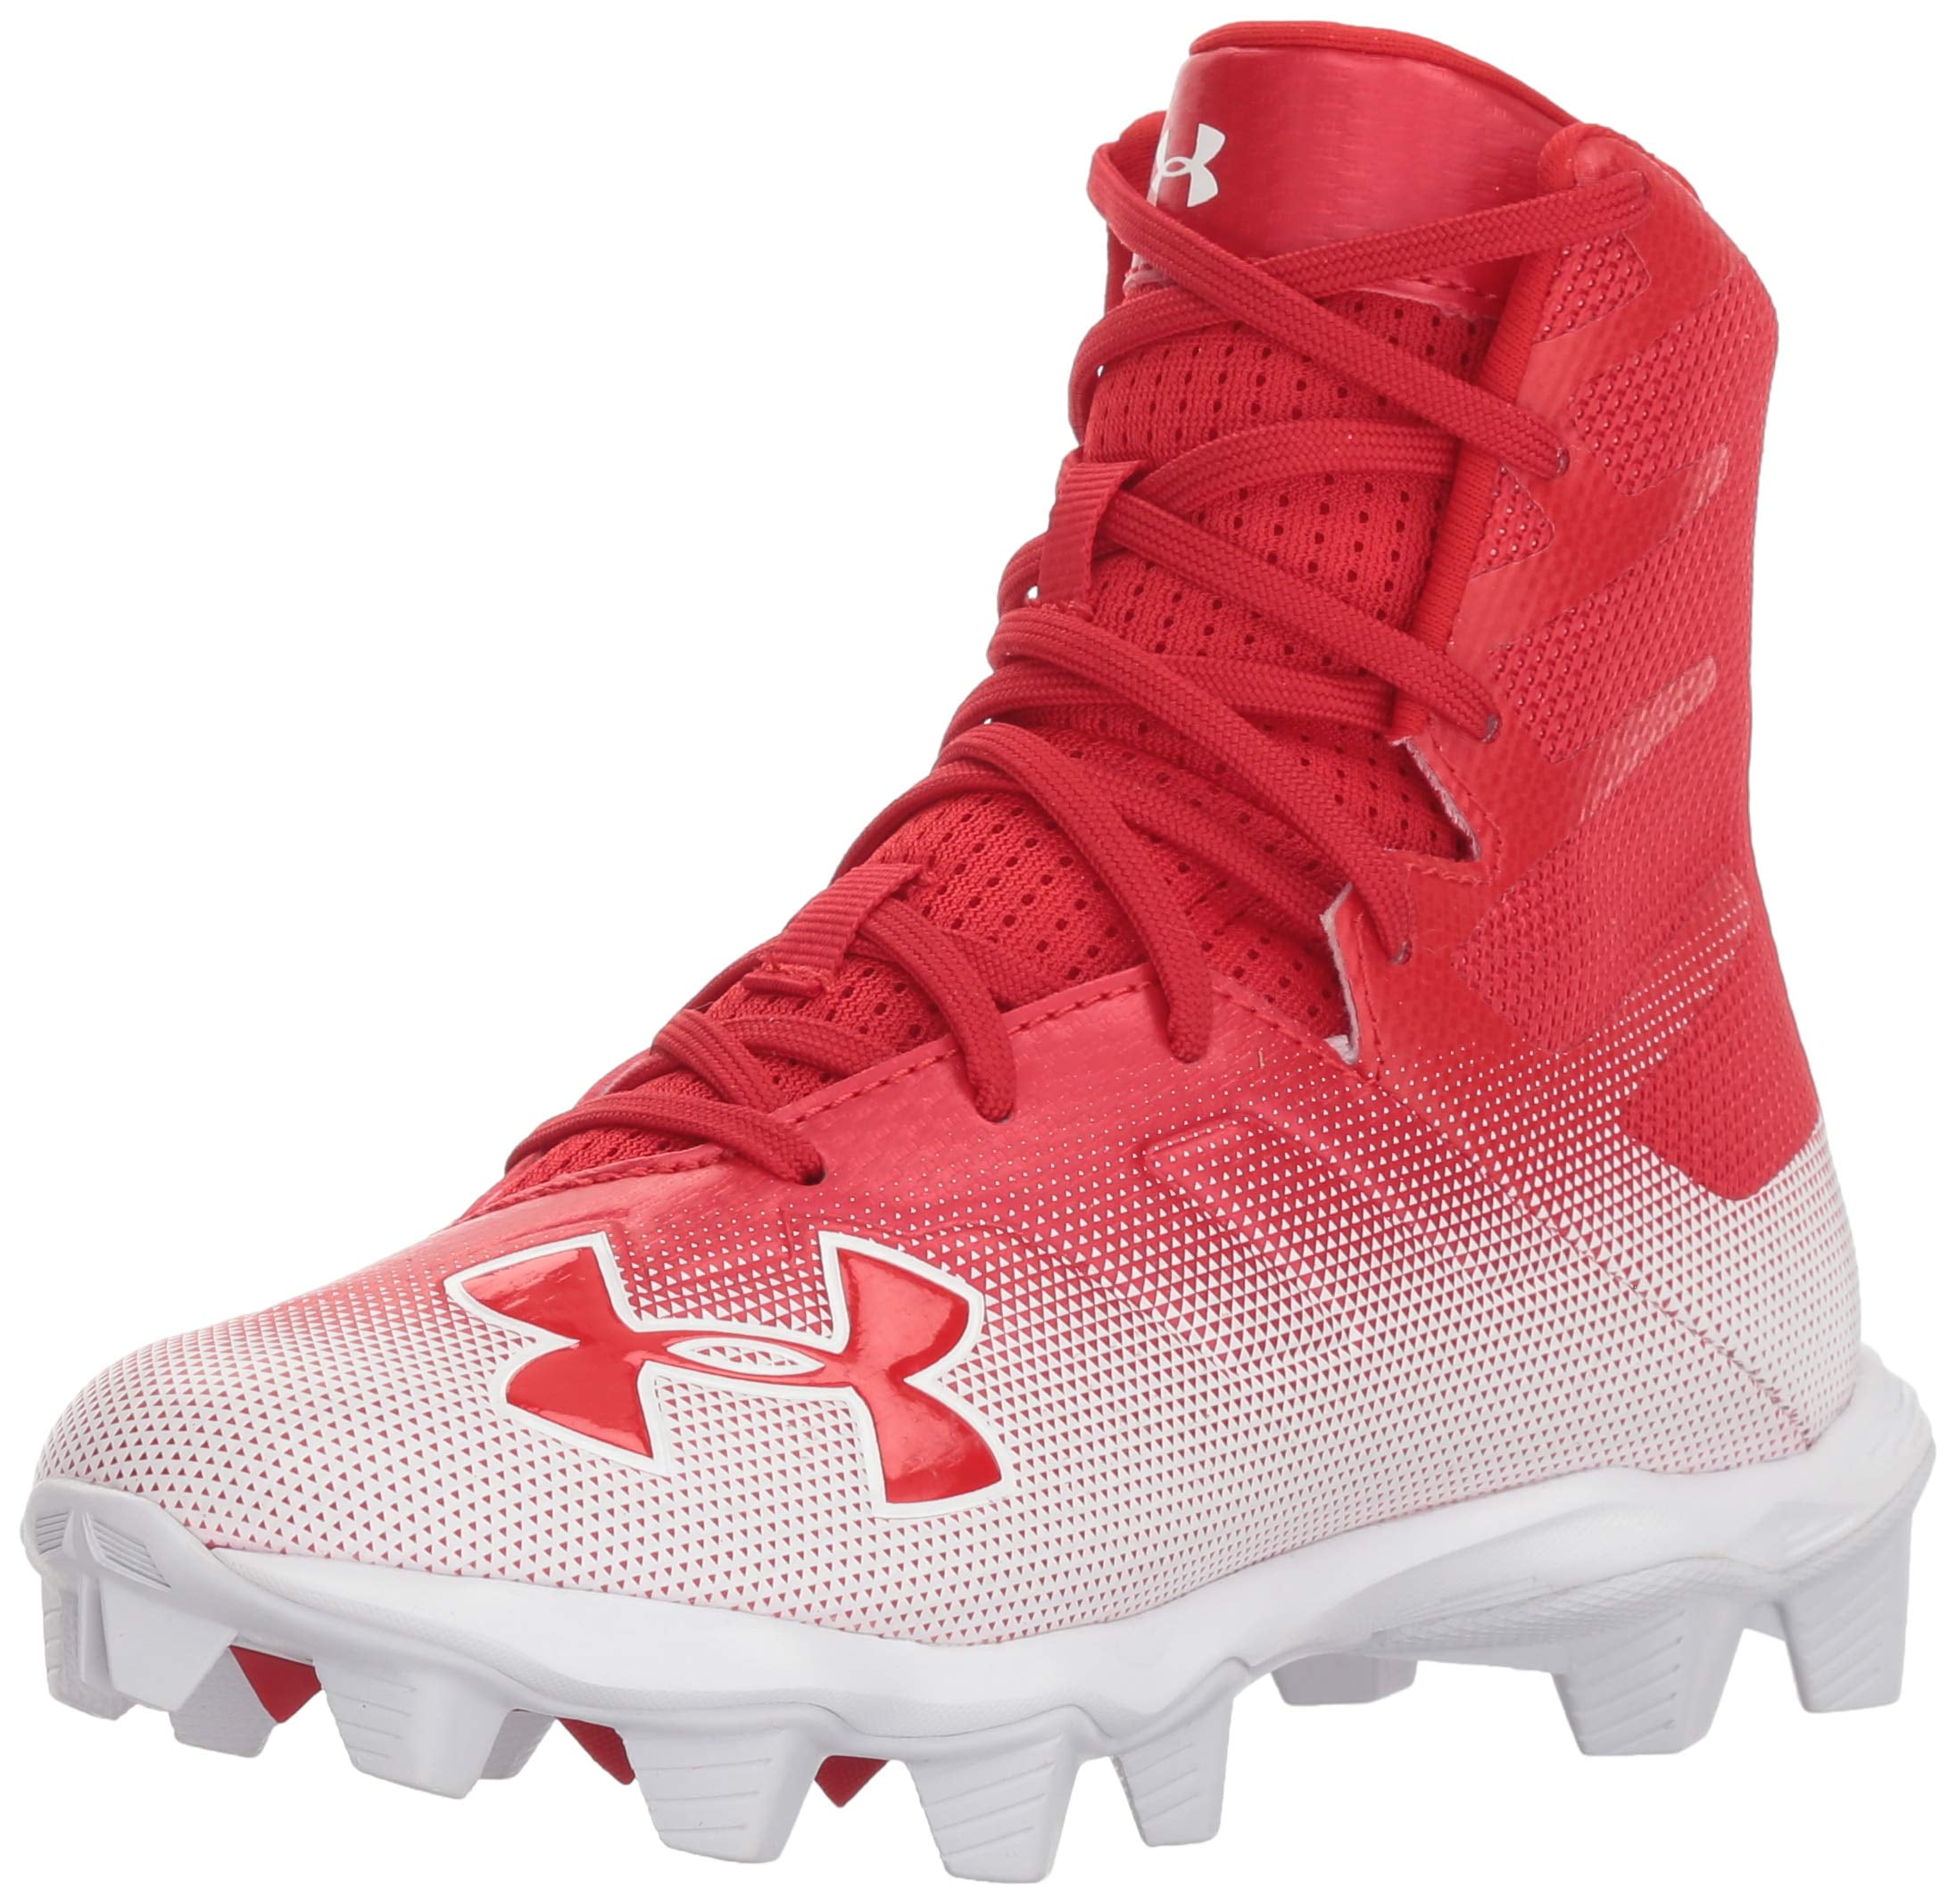 2019 Under Armour Youth Boys Hammer WIDE WIDTH Football Lacrosse Cleats Shoes